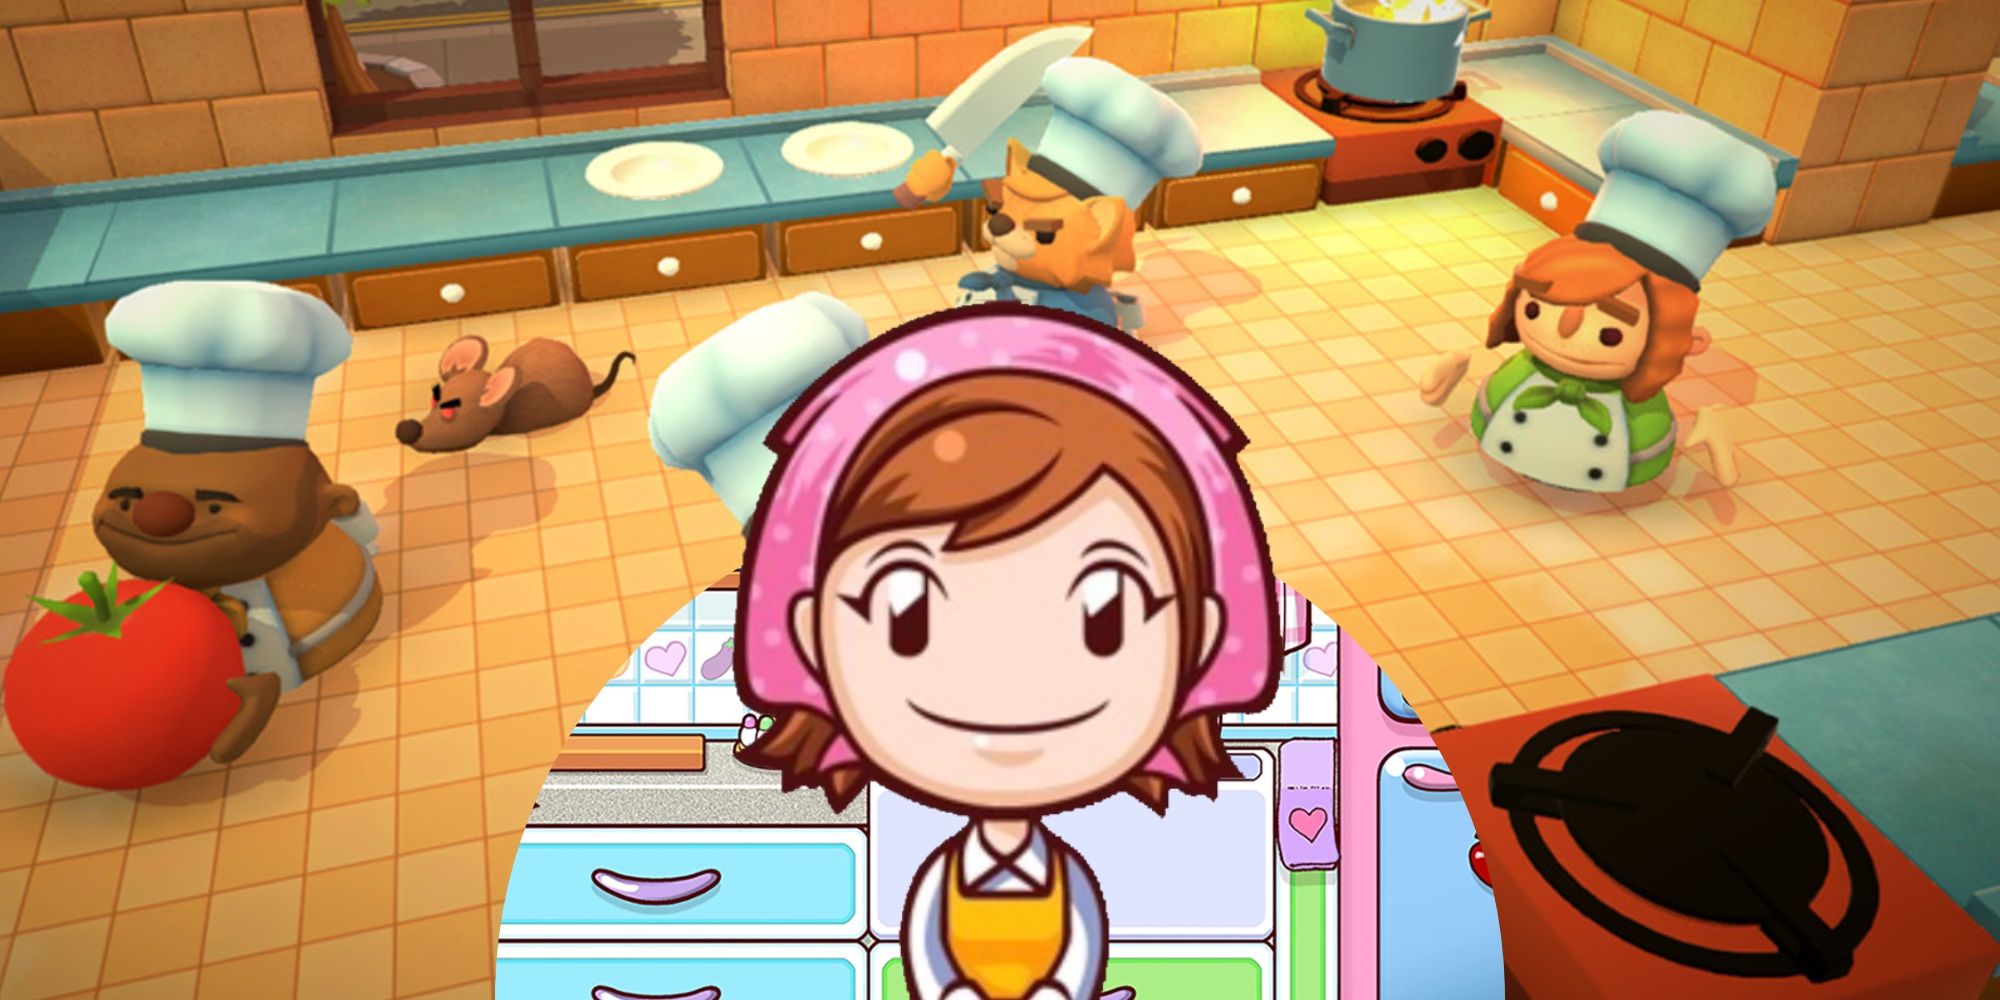 Cooking Games: Overcooked and Cooking Mama